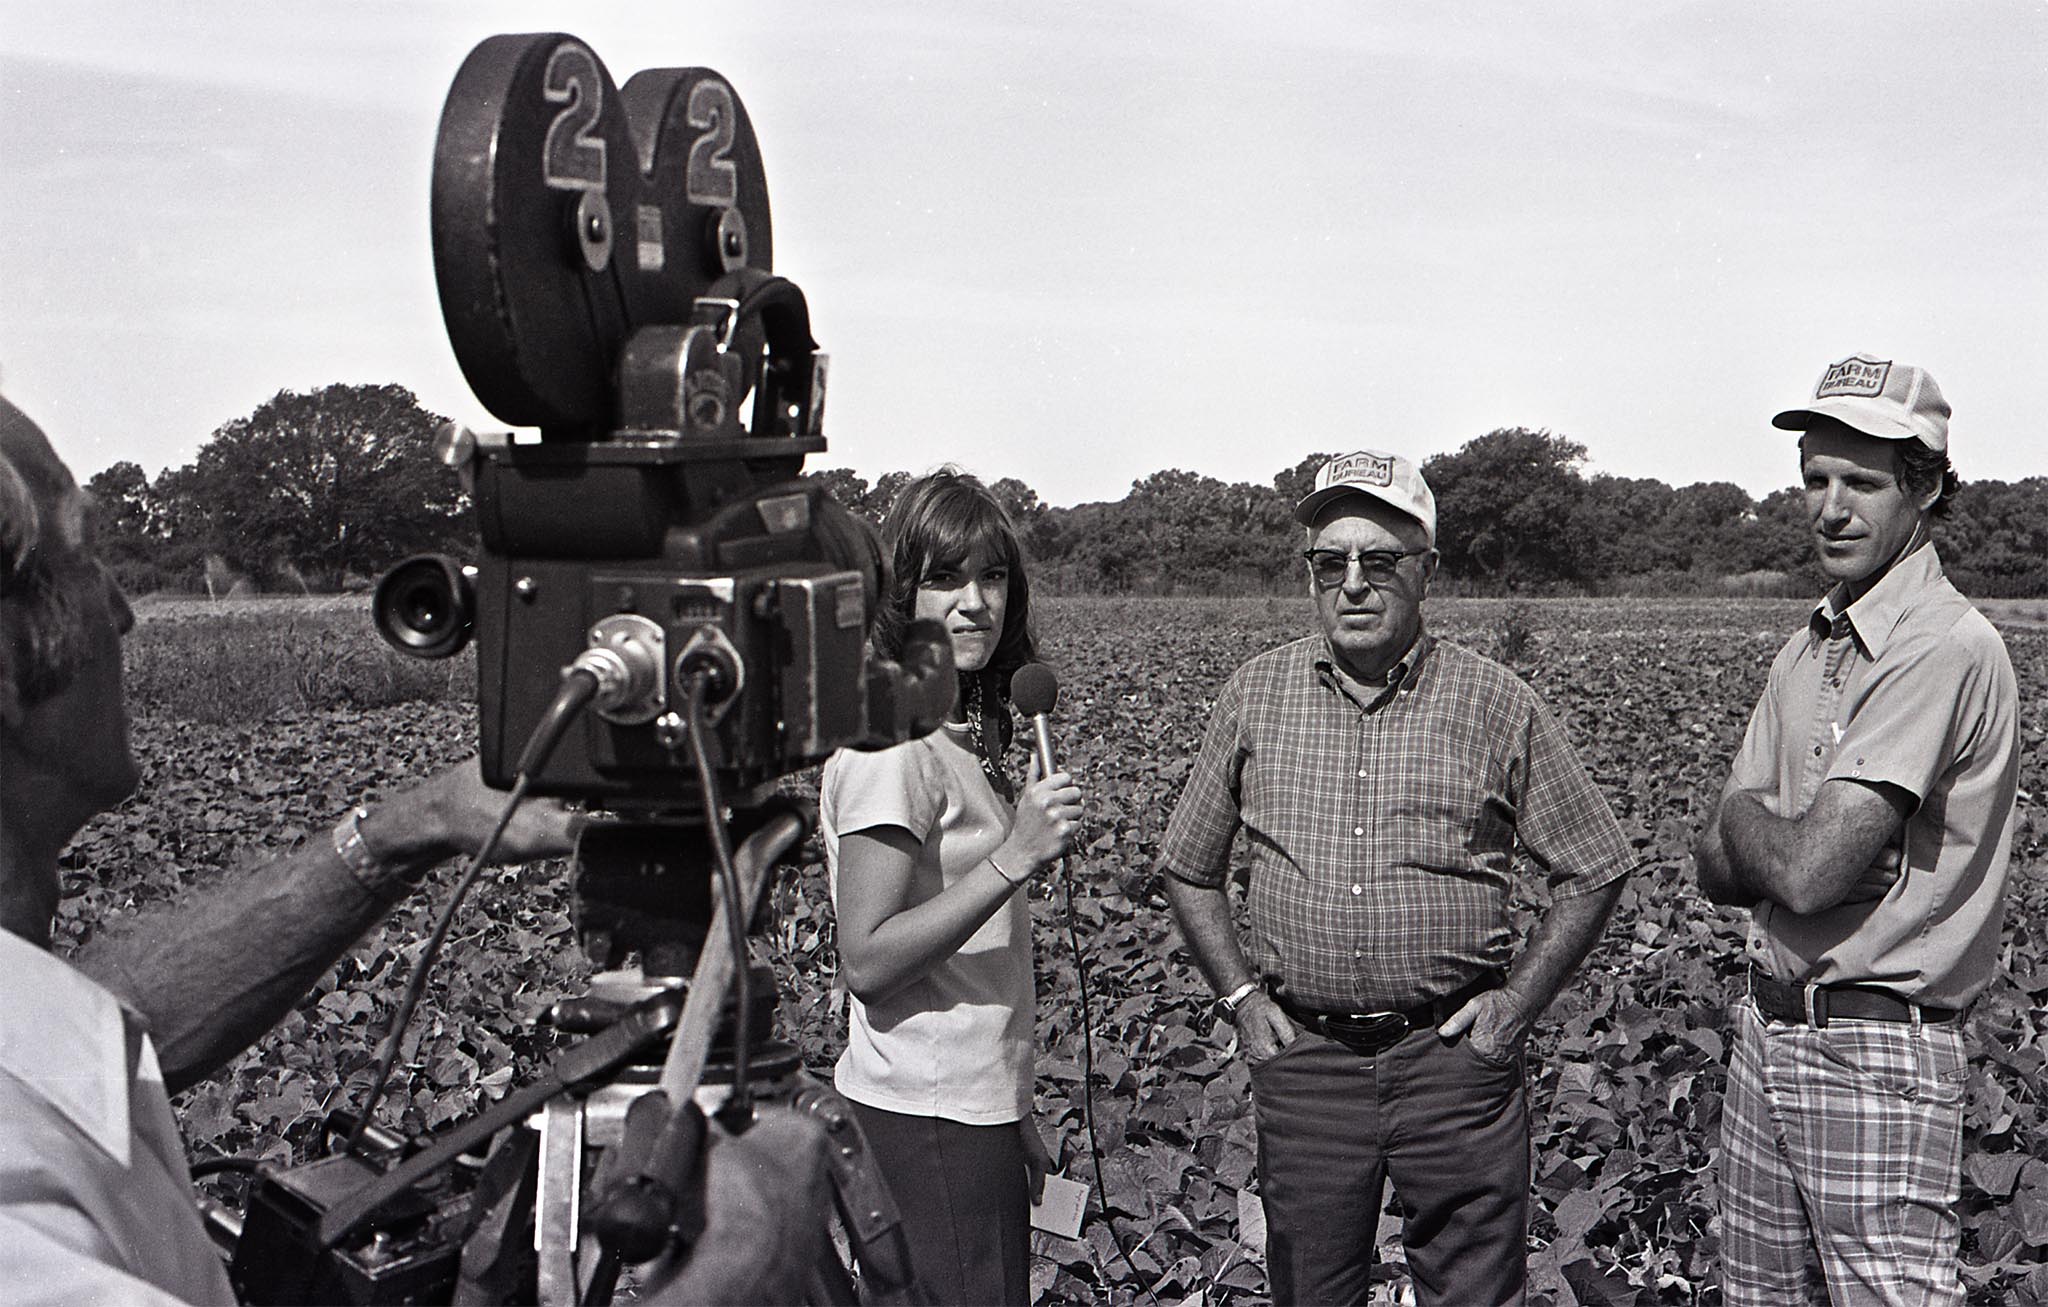 In this photo from 1975, OKFB member Eugene Conrad and his father, Chester, both of Bixby, spoke to a reporter from Tulsa’s KTEW-TV about the advantageous uses of agriculture pesticides and herbicides in food production.